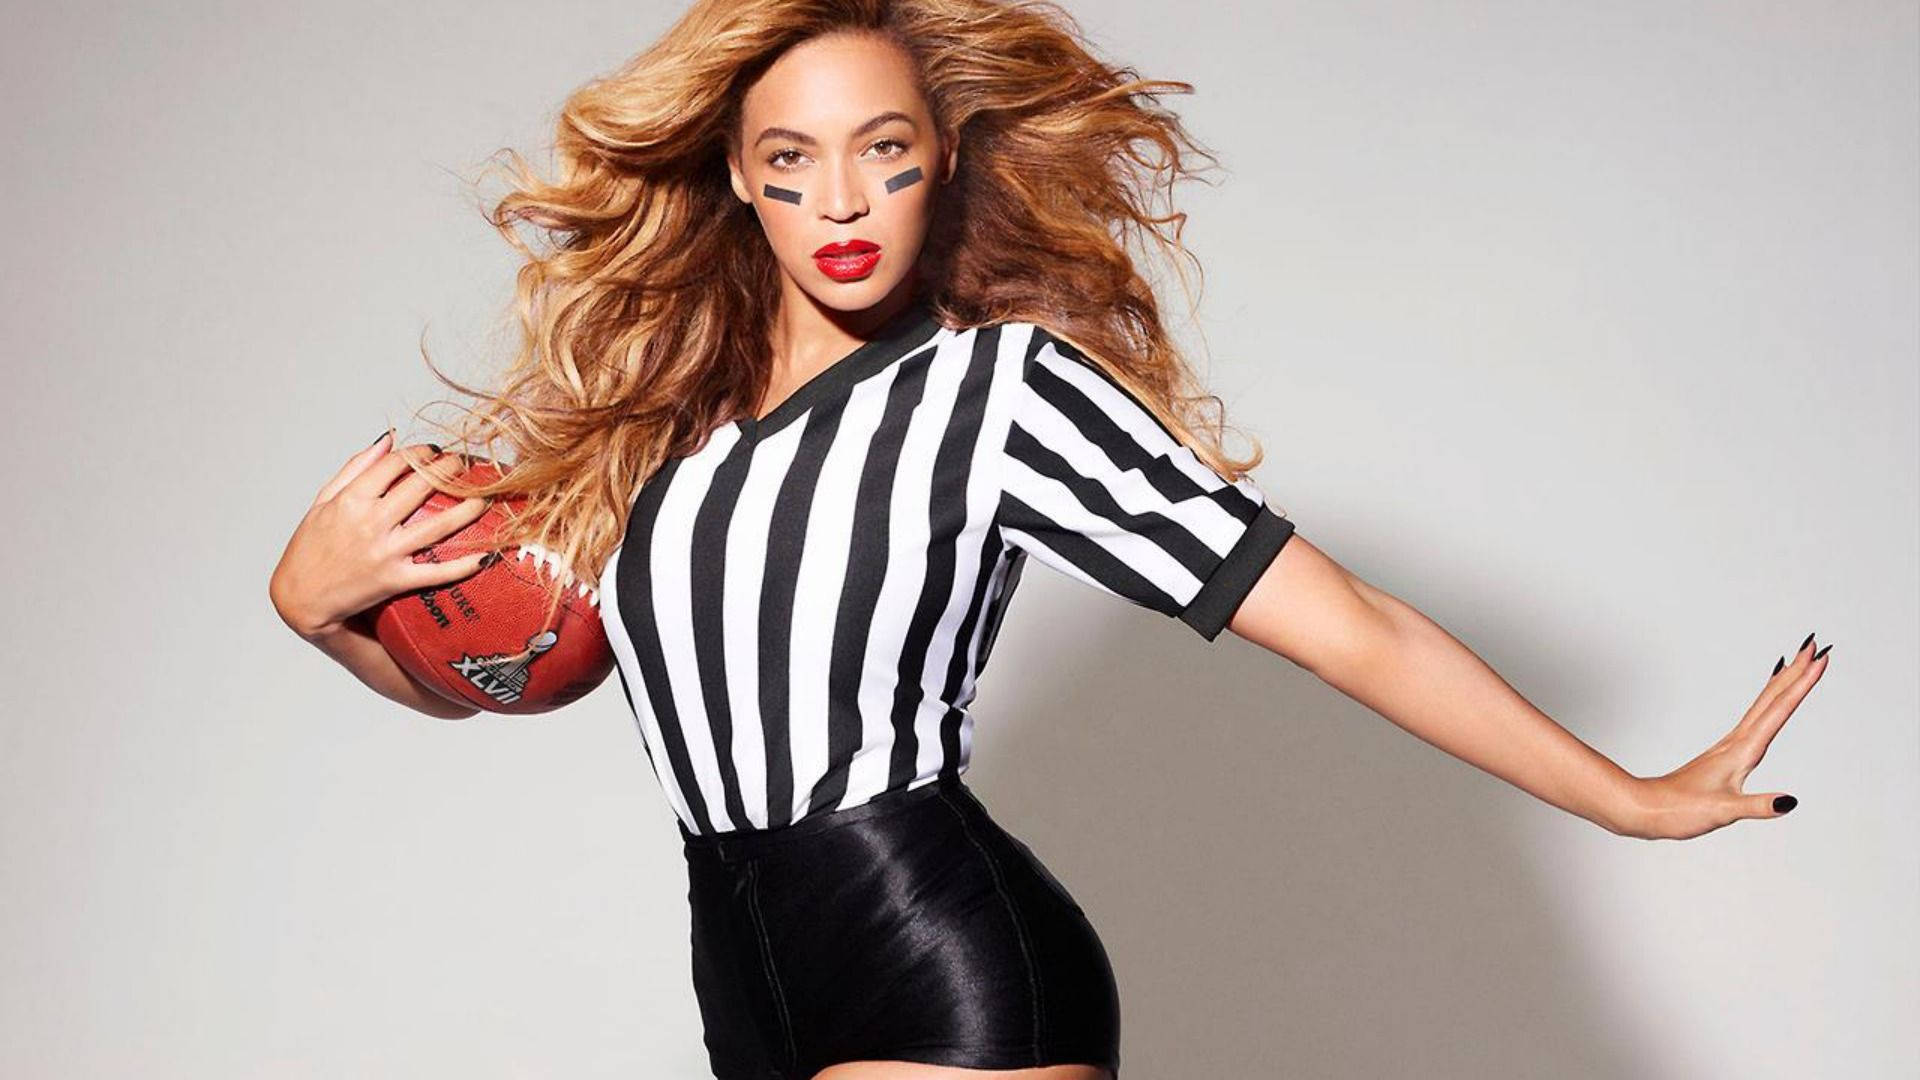 Beyoncé, who is pregnant with twins, will perform at the Super Bowl halftime show. - Beyonce